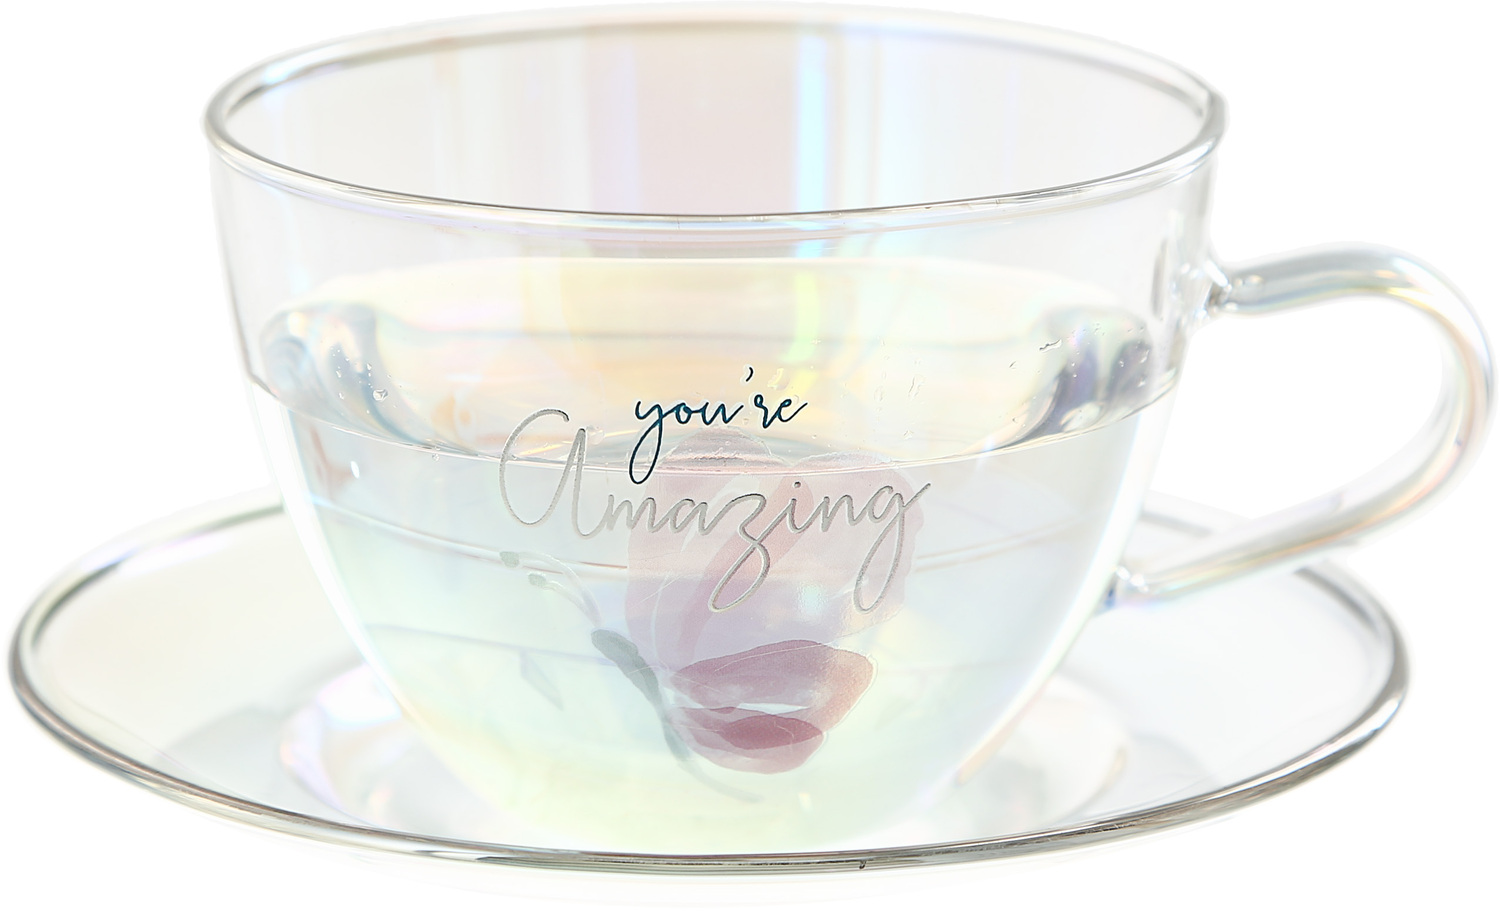 Amazing by Rosy Heart - Amazing - 7 oz Glass Teacup and Saucer